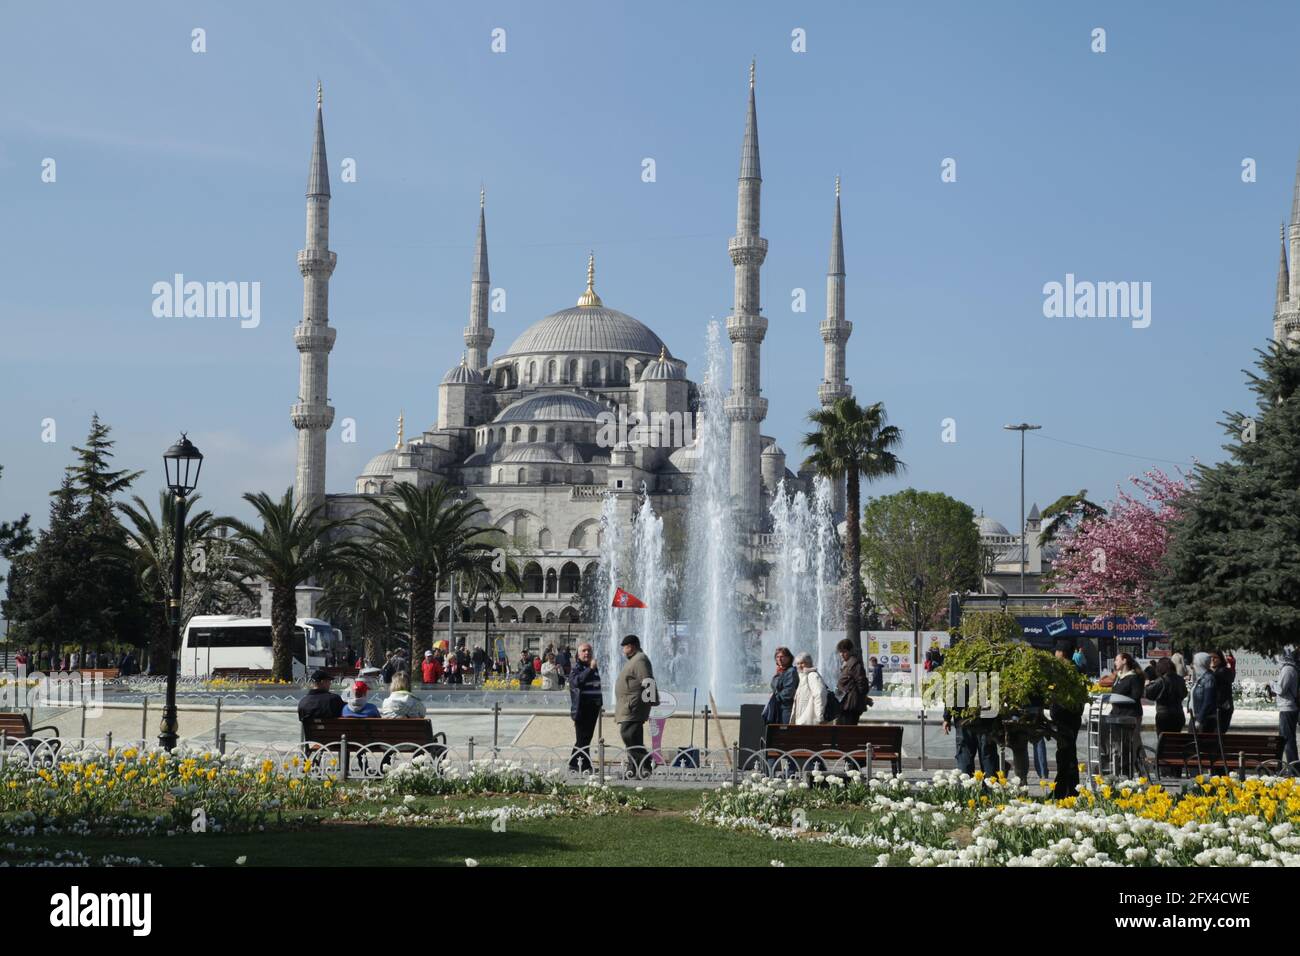 Turkey; Istanbul; Sultanahmet neighbourhood takes its name from the Sultanahmet Camil, the Blue Mosque and is the heart of the old city. Stock Photo